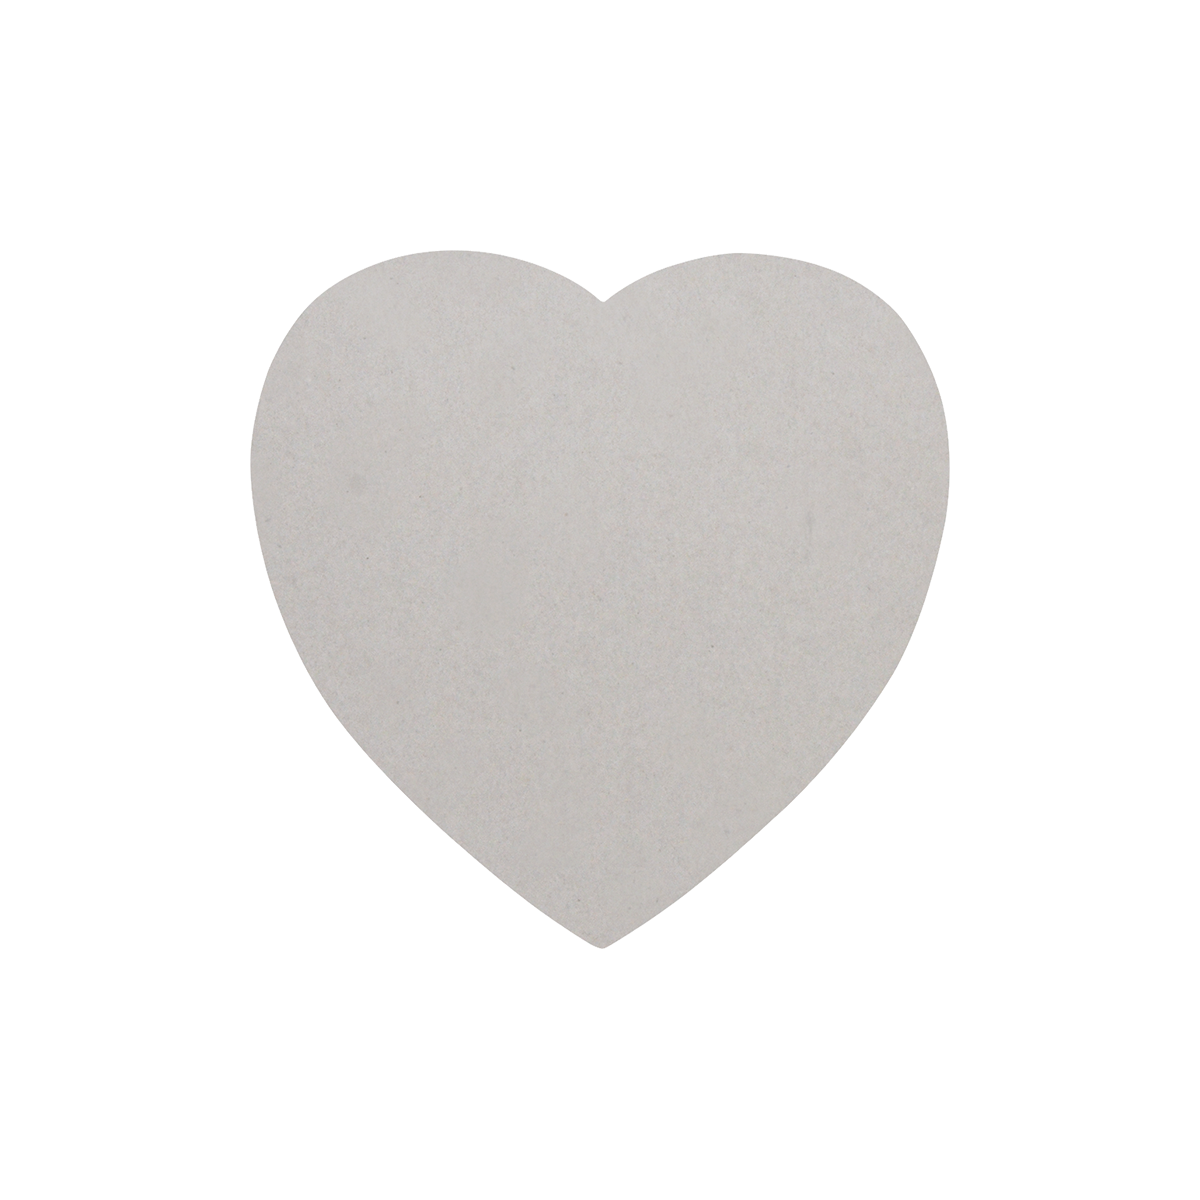 white flower Heart-Shaped Jigsaw Puzzle (Set of 75 Pieces)